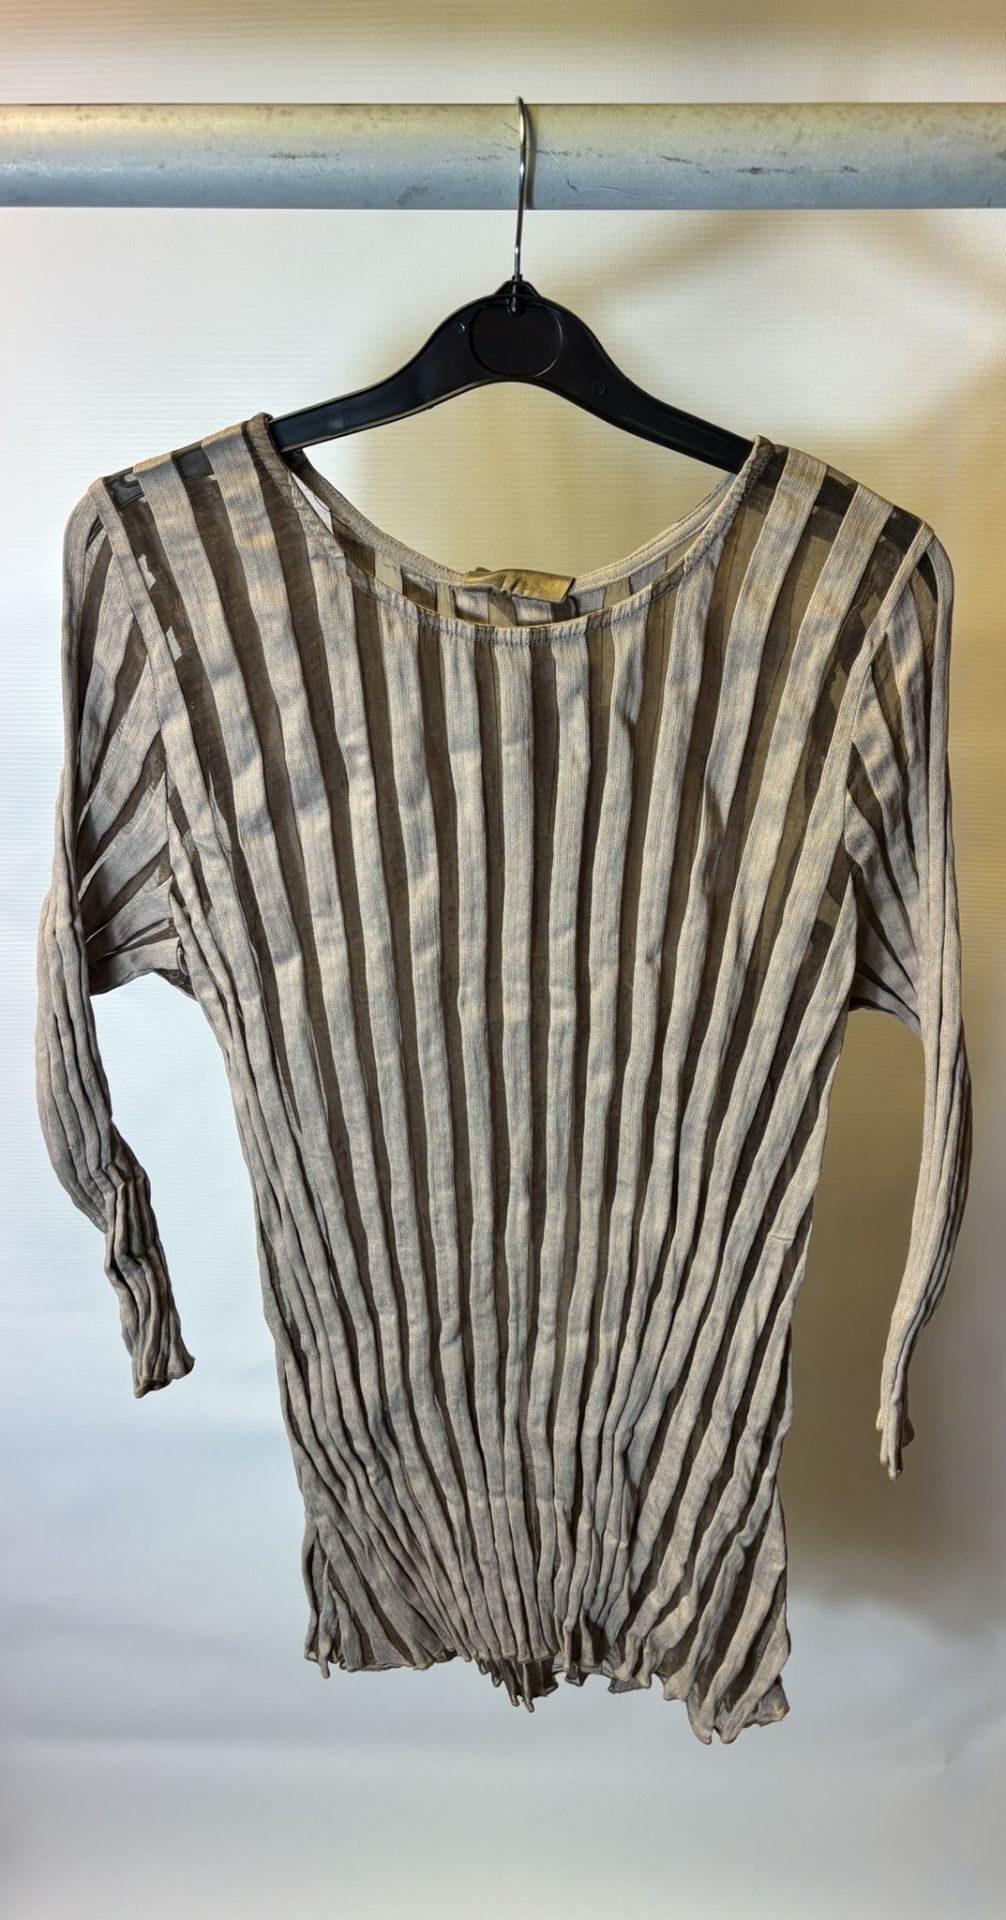 8 x Various Women's Tunic Stripe Dresses As Seen In Photos - Image 7 of 24